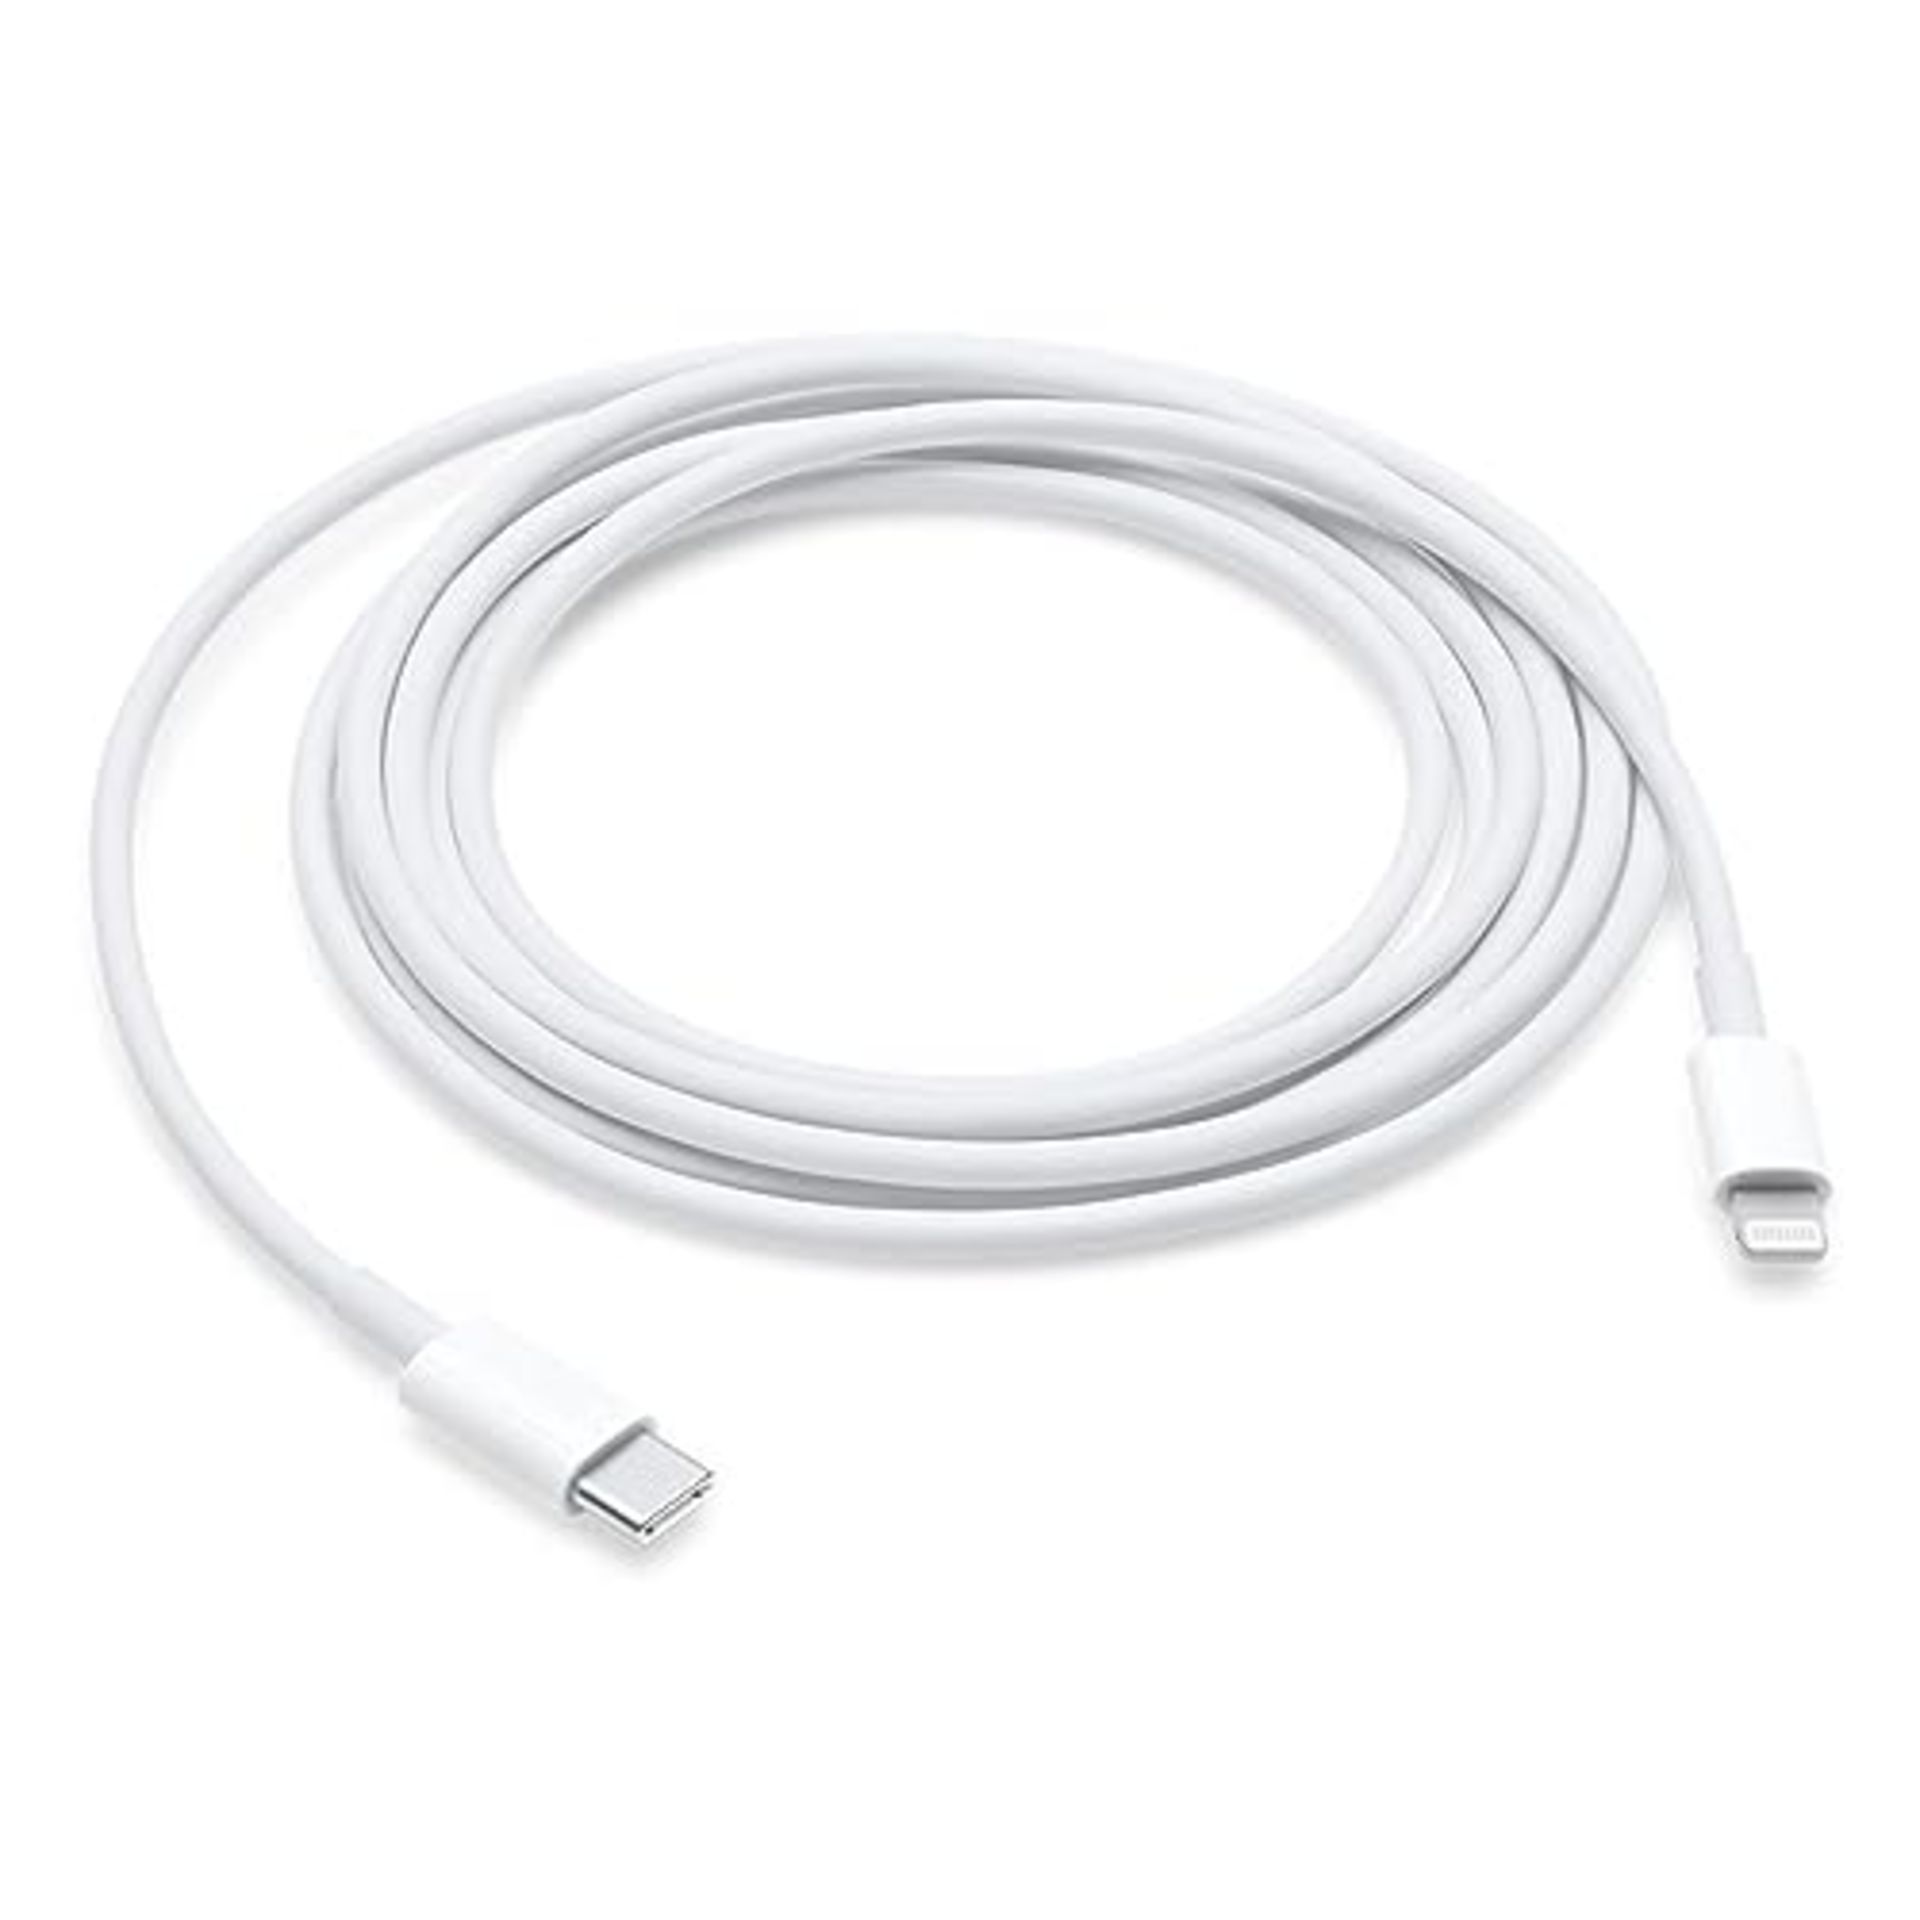 Apple Lightning to USB-C Cable (1m), Tablet